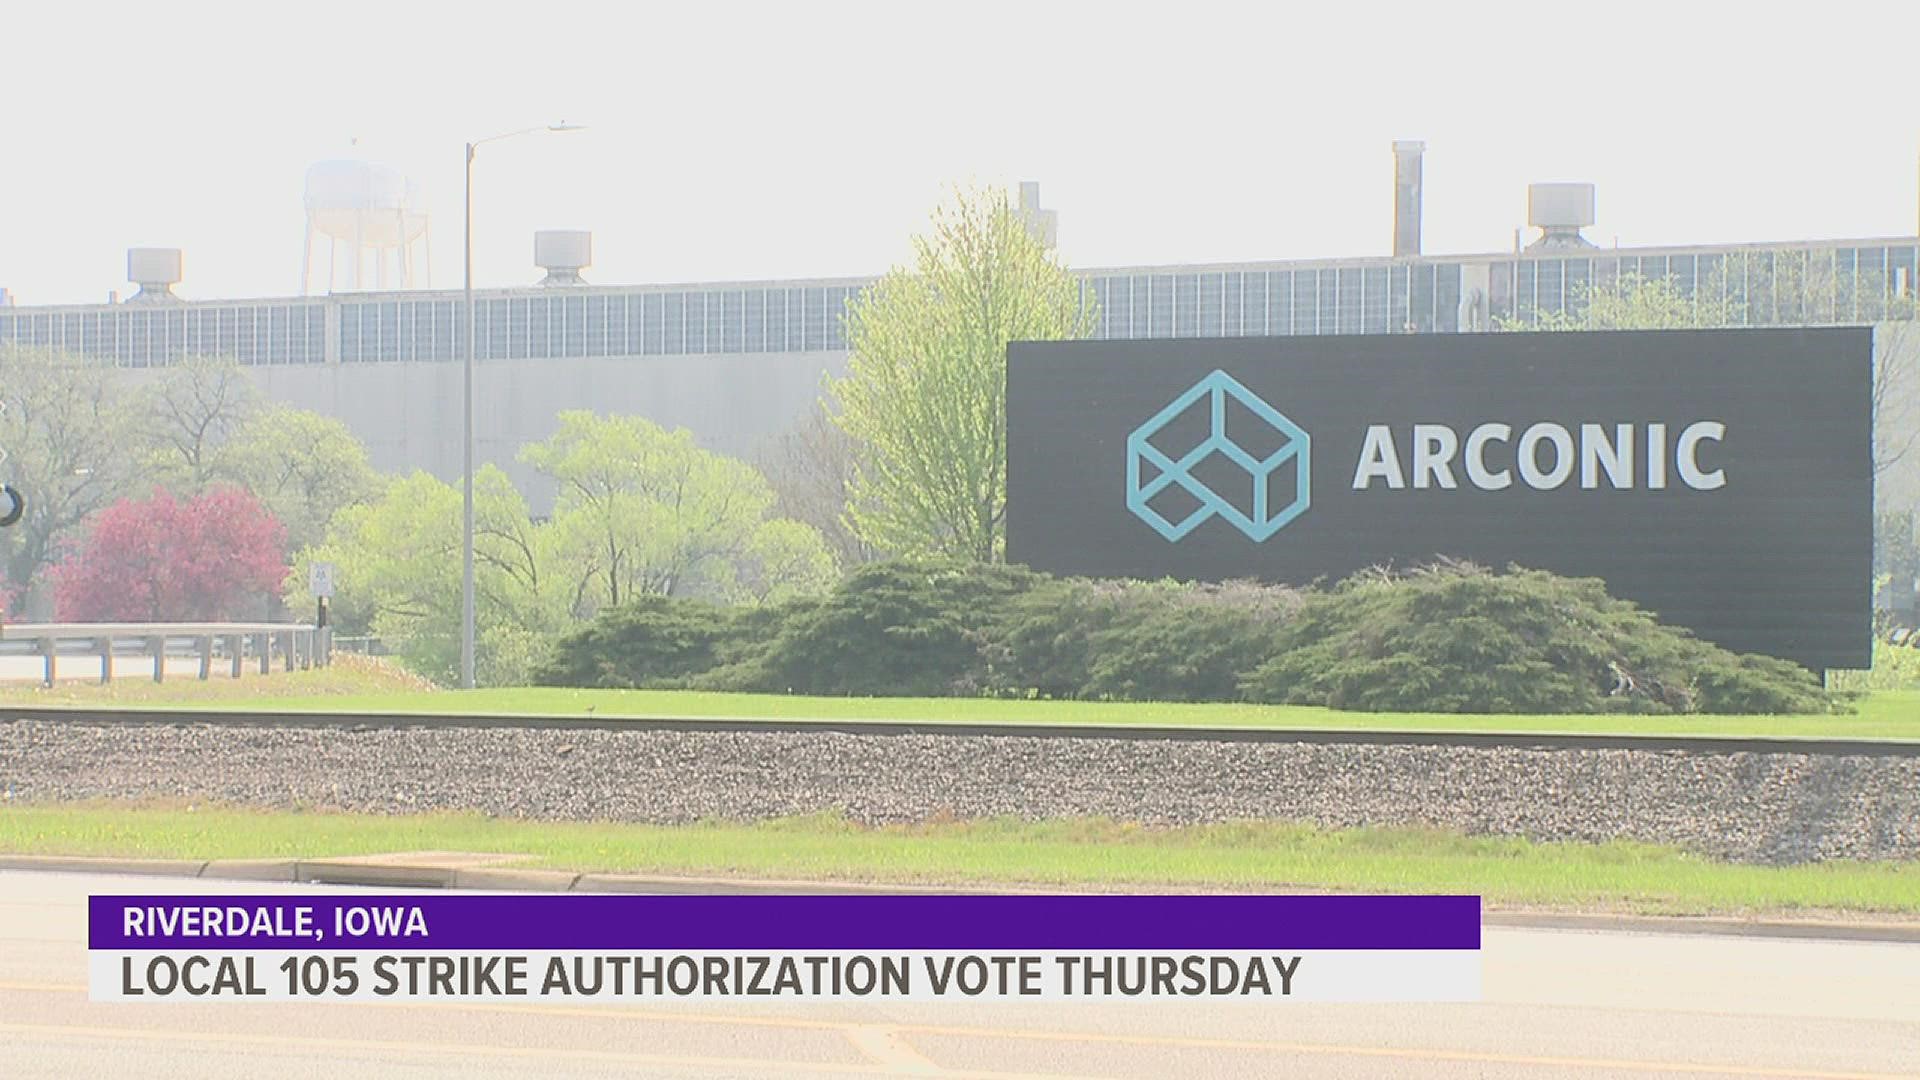 Amid contract negotiations with Arconic, United Steelworkers Local 105 will vote Thursday whether or not to authorize a strike against the manufacturing company.